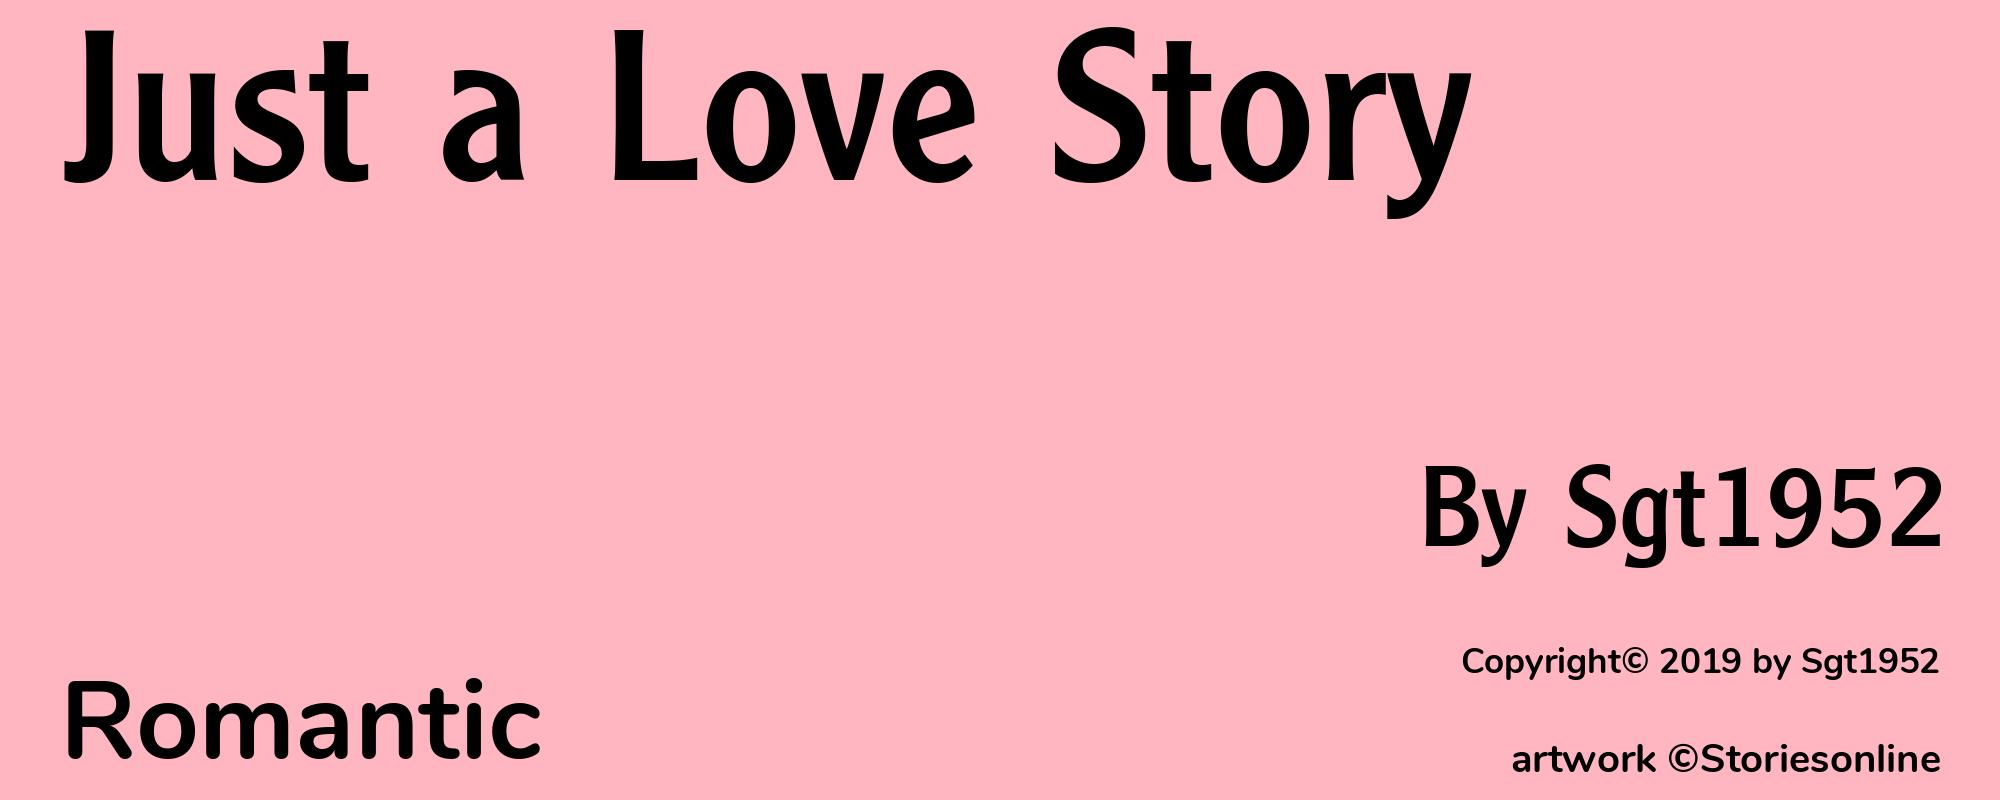 Just a Love Story - Cover